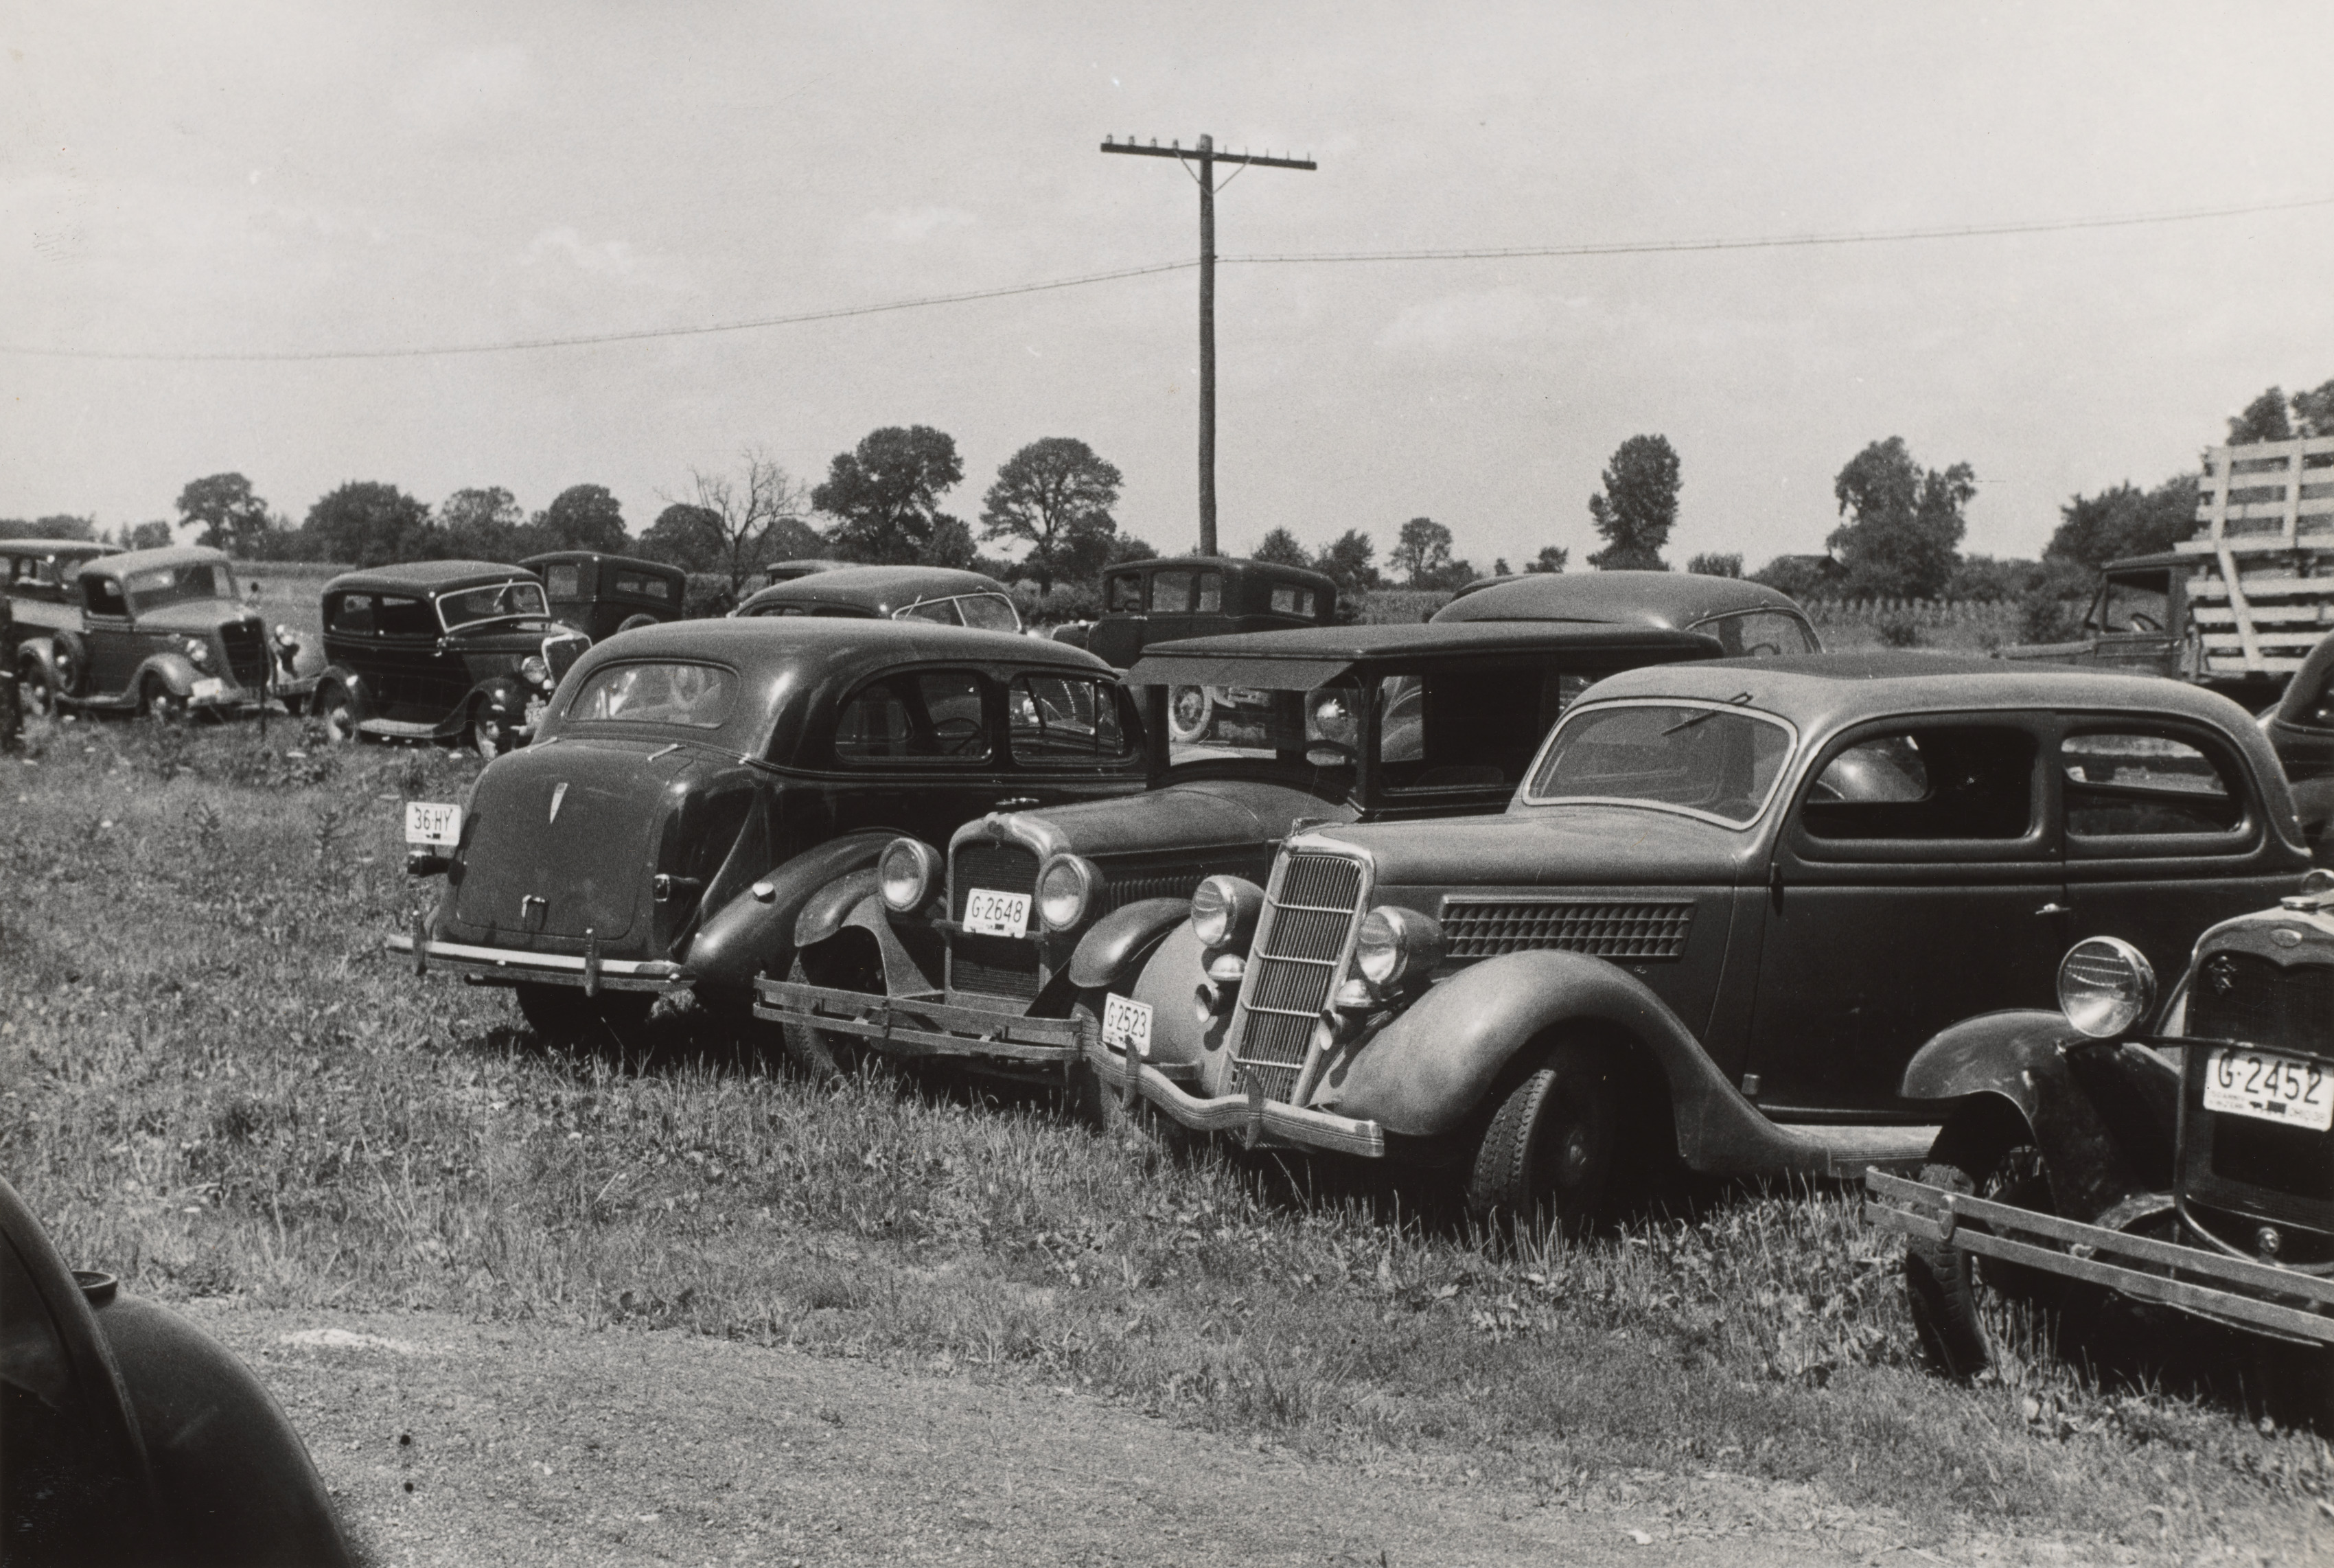 Farmers' cars parked outside of public auction, Central Ohio